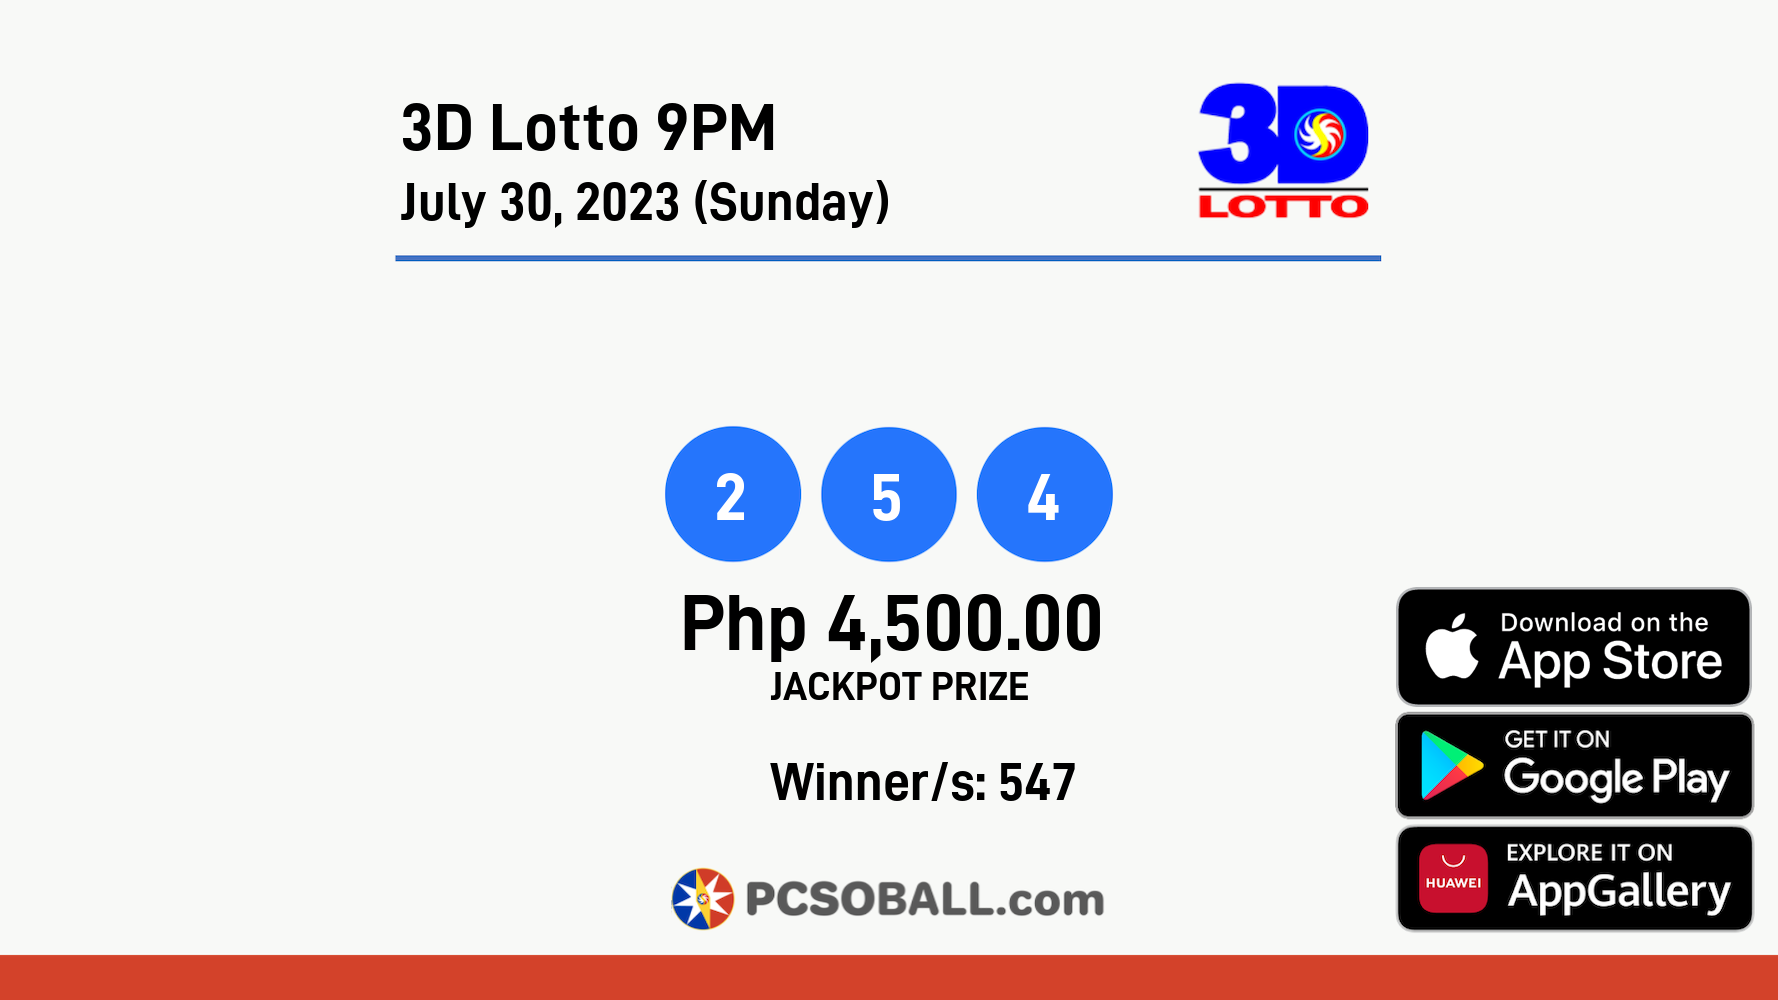 3D Lotto 9PM July 30, 2023 (Sunday) Result